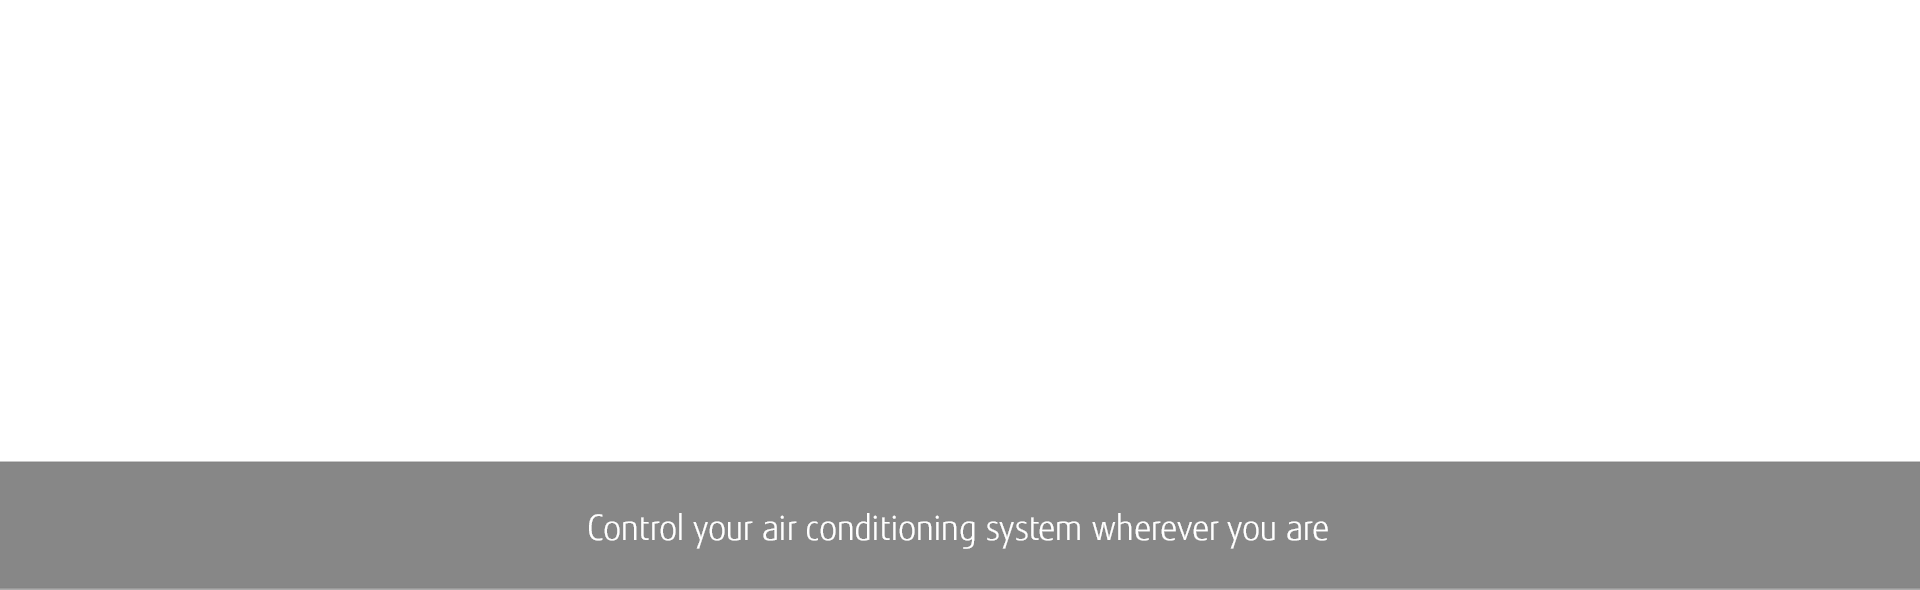 RESIDENTIAL AIRSTAGE MINI-SPLIT TECHNOLOGY: Control your air conditioning system wherever you are.